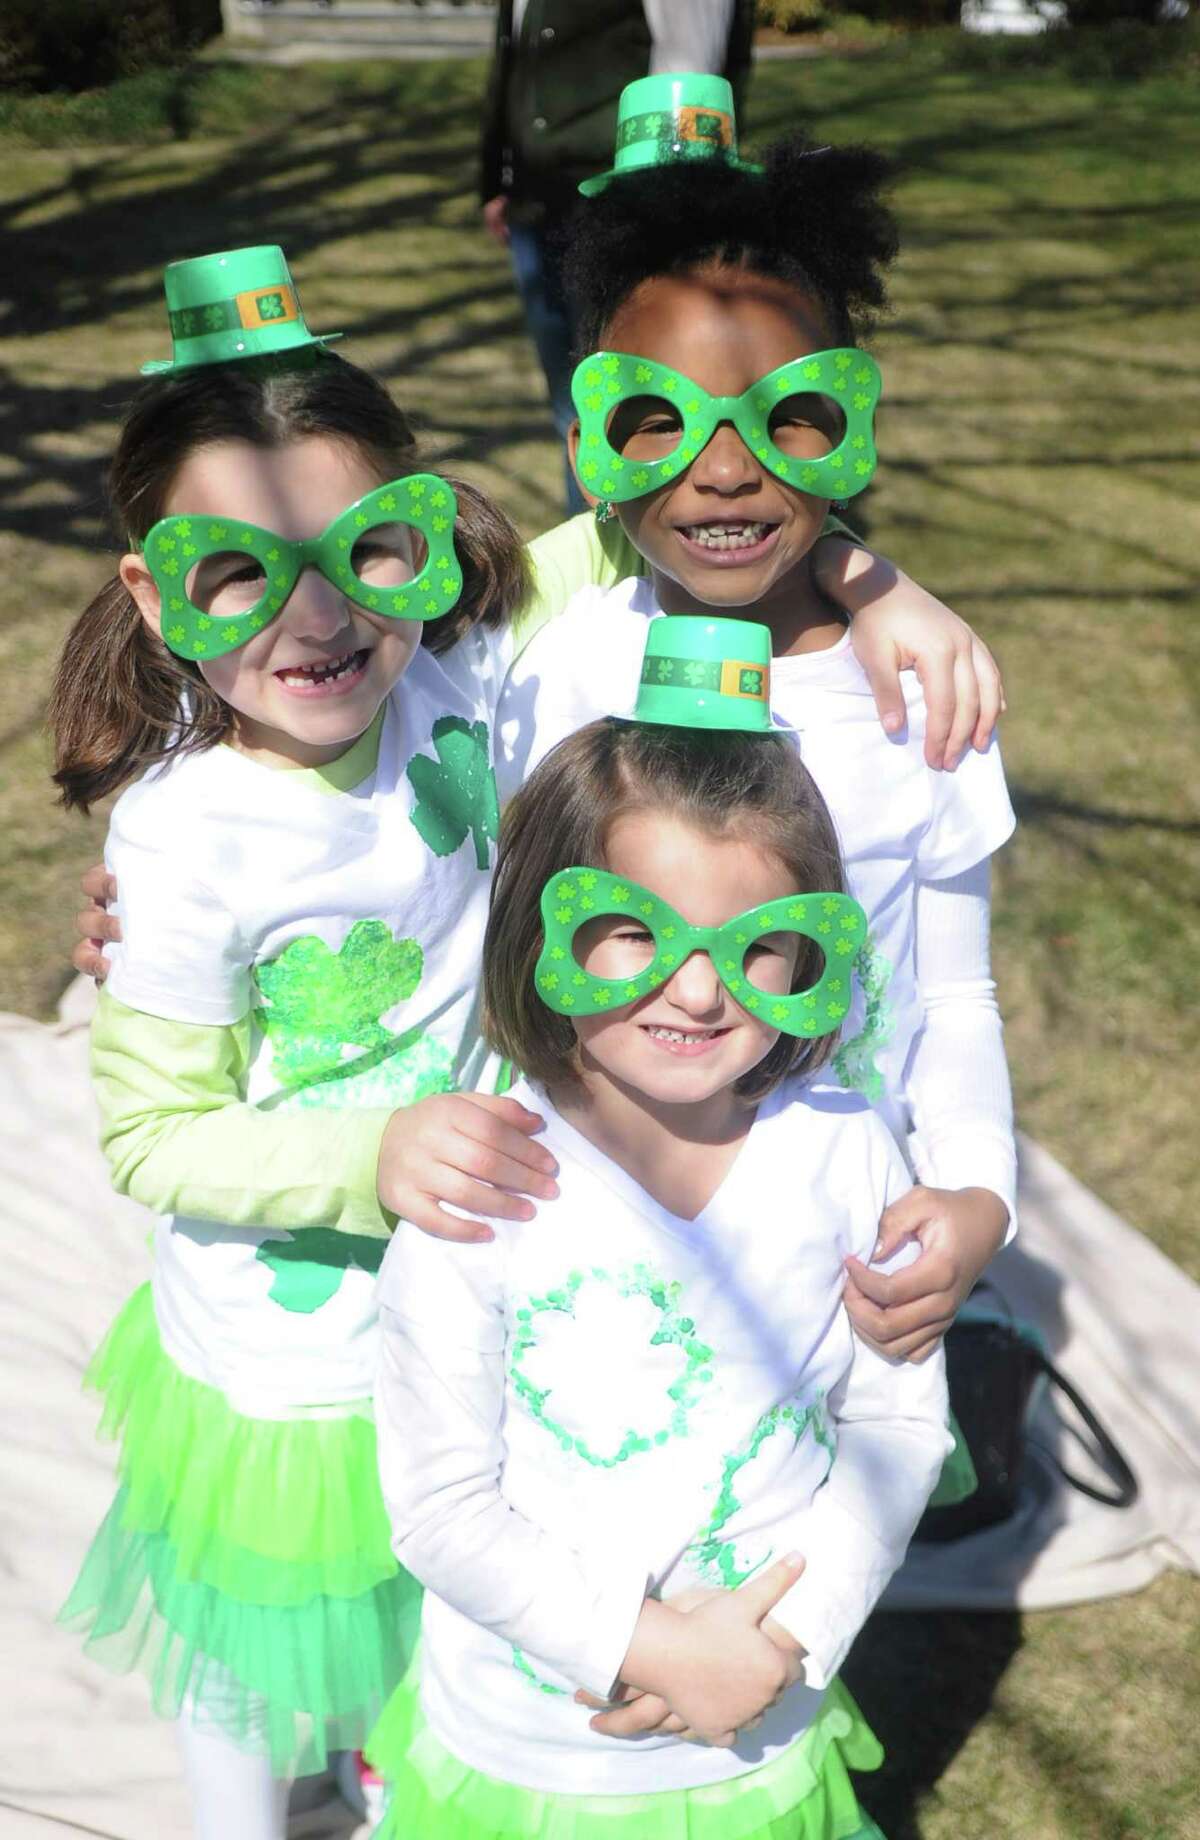 Clockwise from top left, Dakota DiNuzzo, 6, Marley Clarke, 6, and Hailey DiNuzzo, 3, at the St. Patrick's Day Parade in Milford, Conn., on Saturday, March 12, 2016.